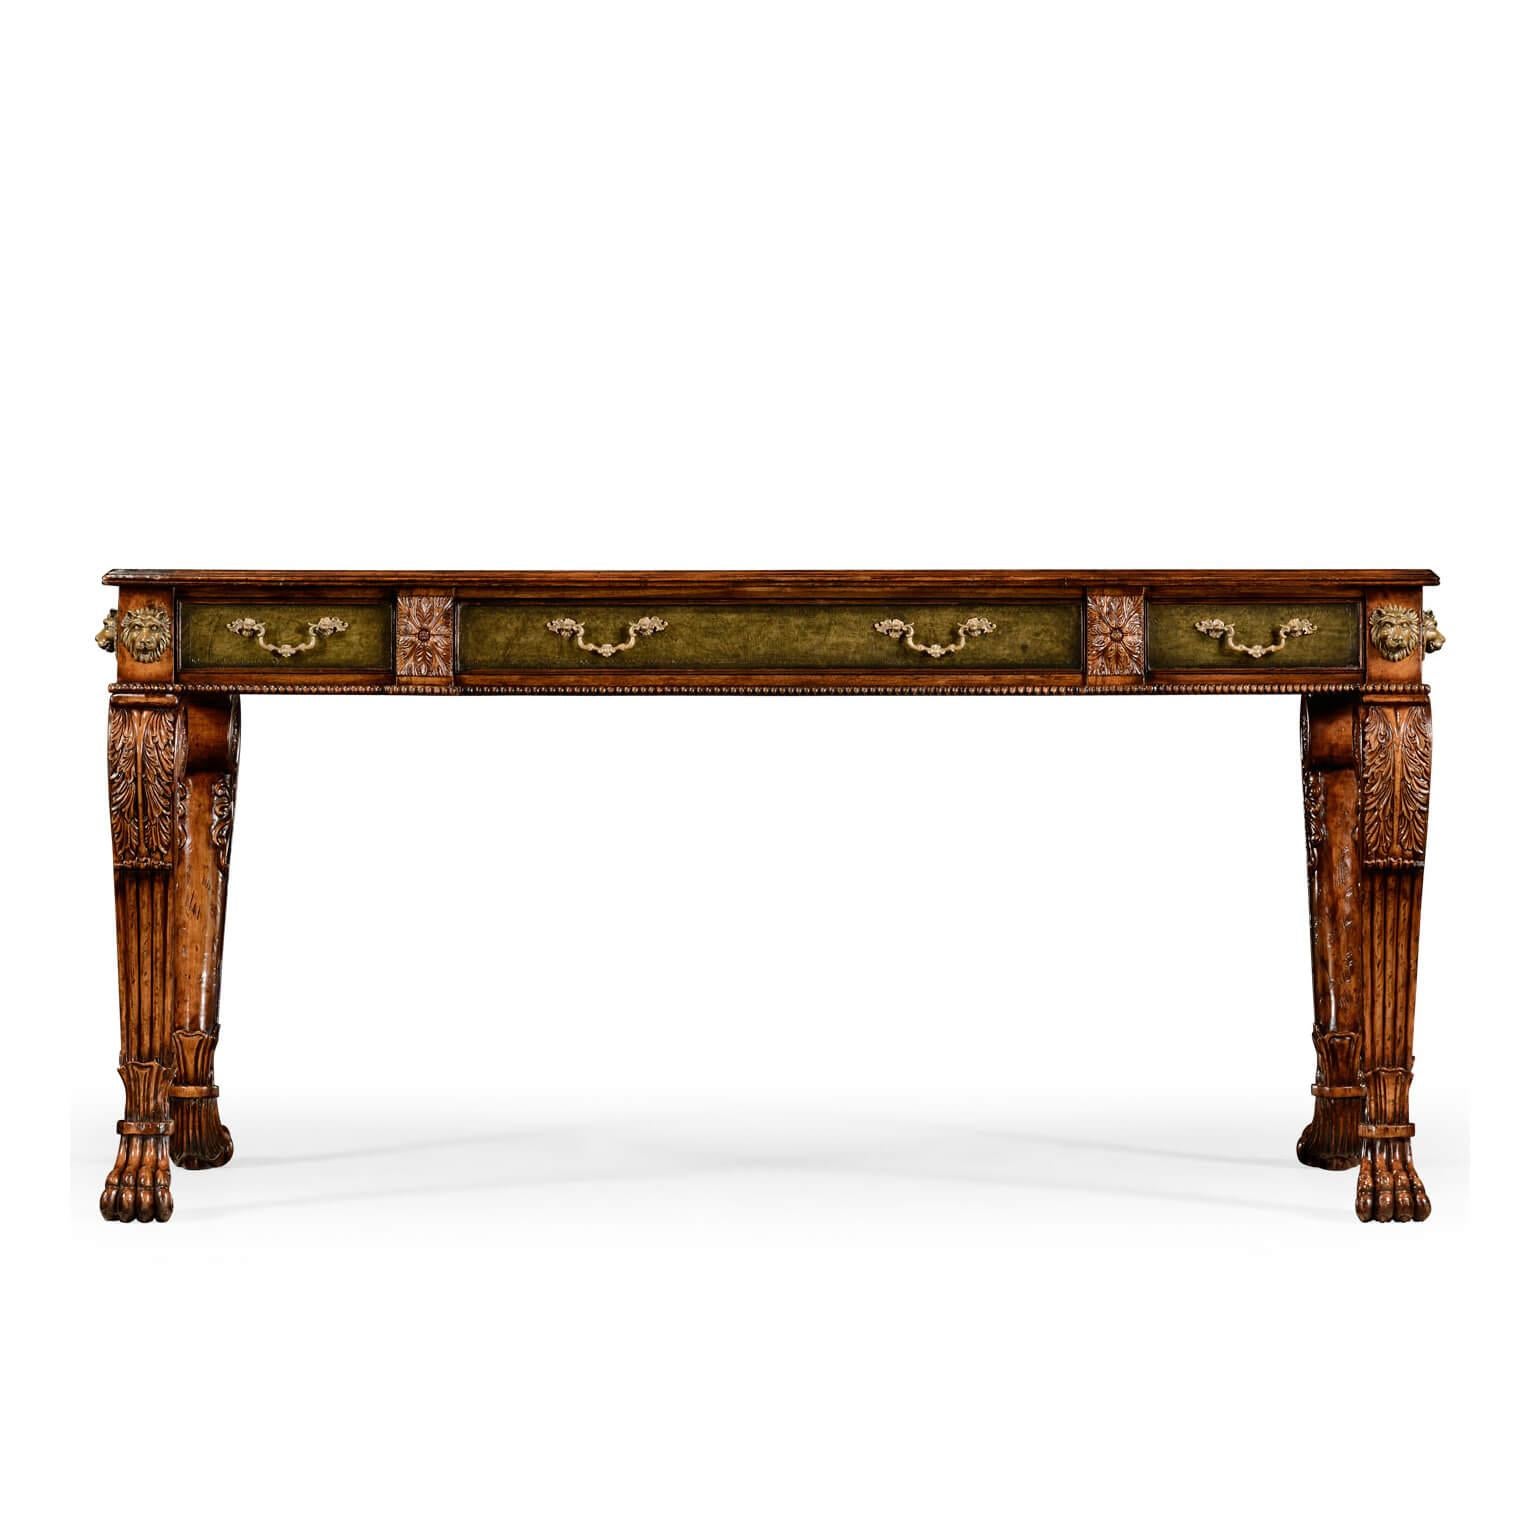 A Regency style leather top walnut carved writing table with brass lion heads, carved acanthus knees, three drawers, and Lion paw feet.

Dimensions: 64